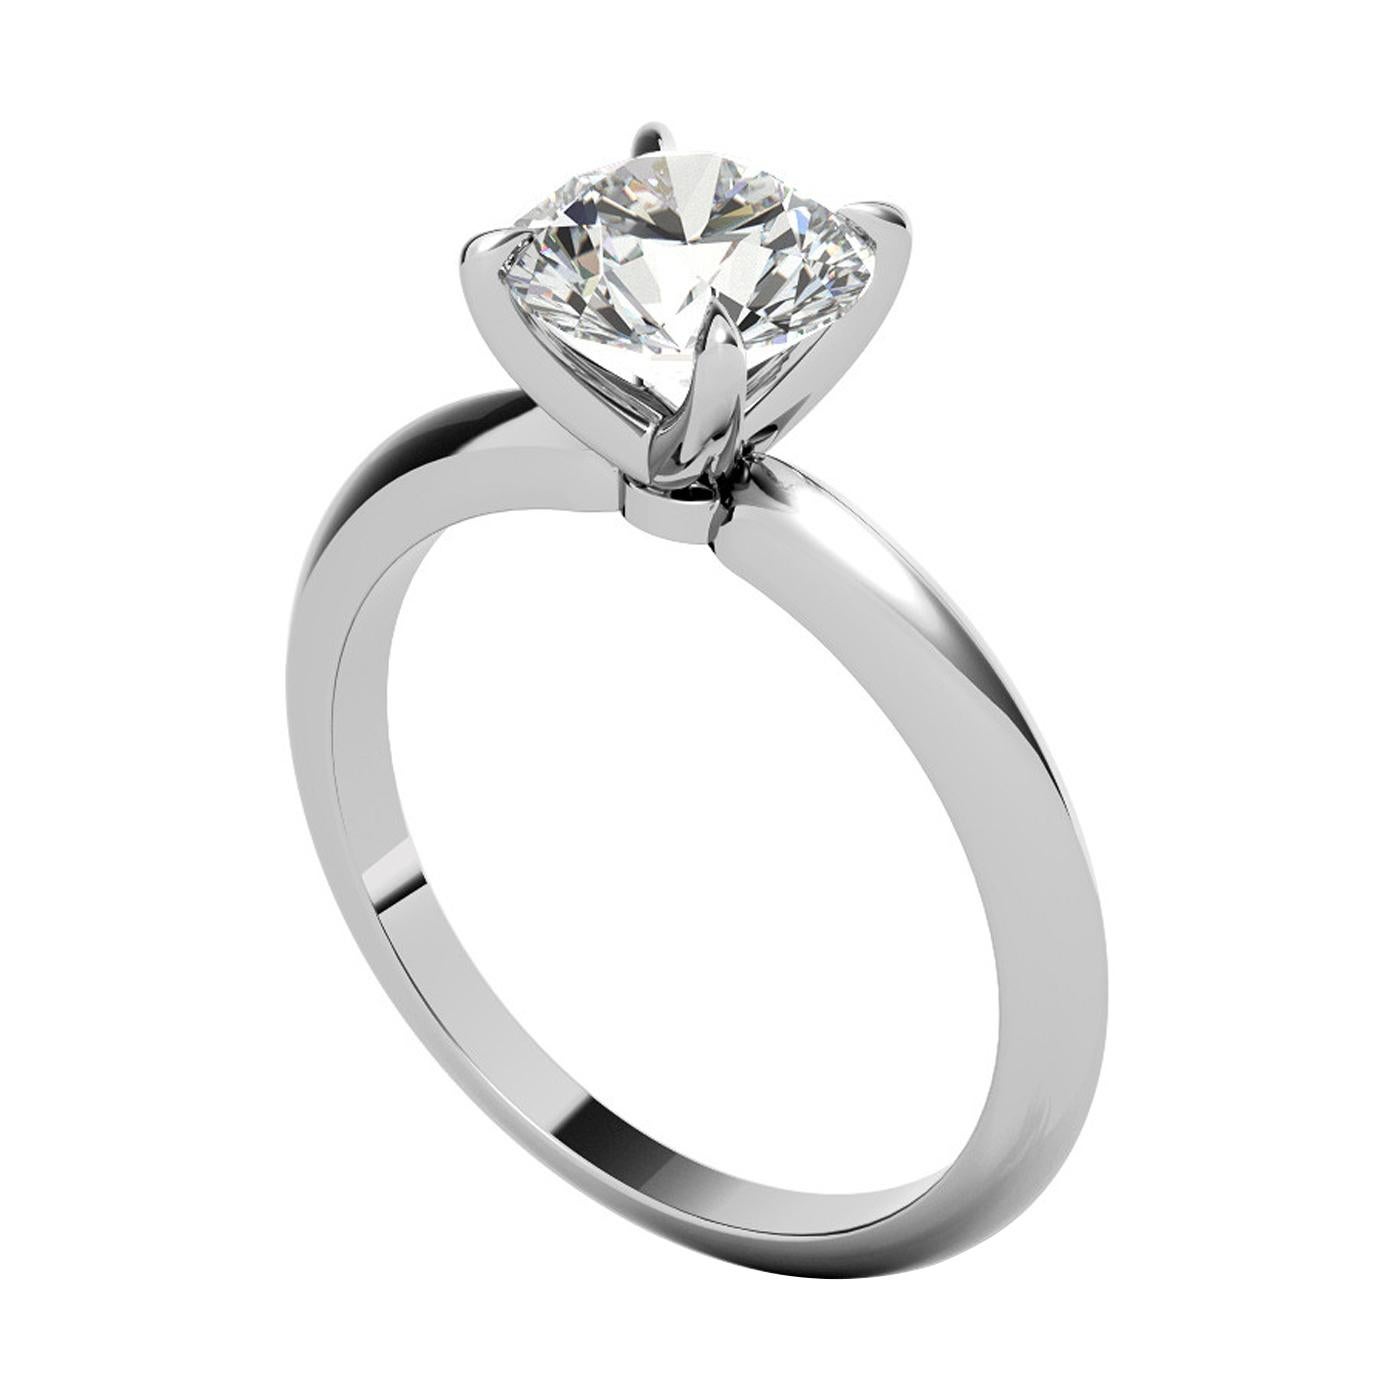 Round Cut 2.41 Carat Natural Round Diamond Ring 4-Prong Tiffany Style in 14K White Gold For Sale